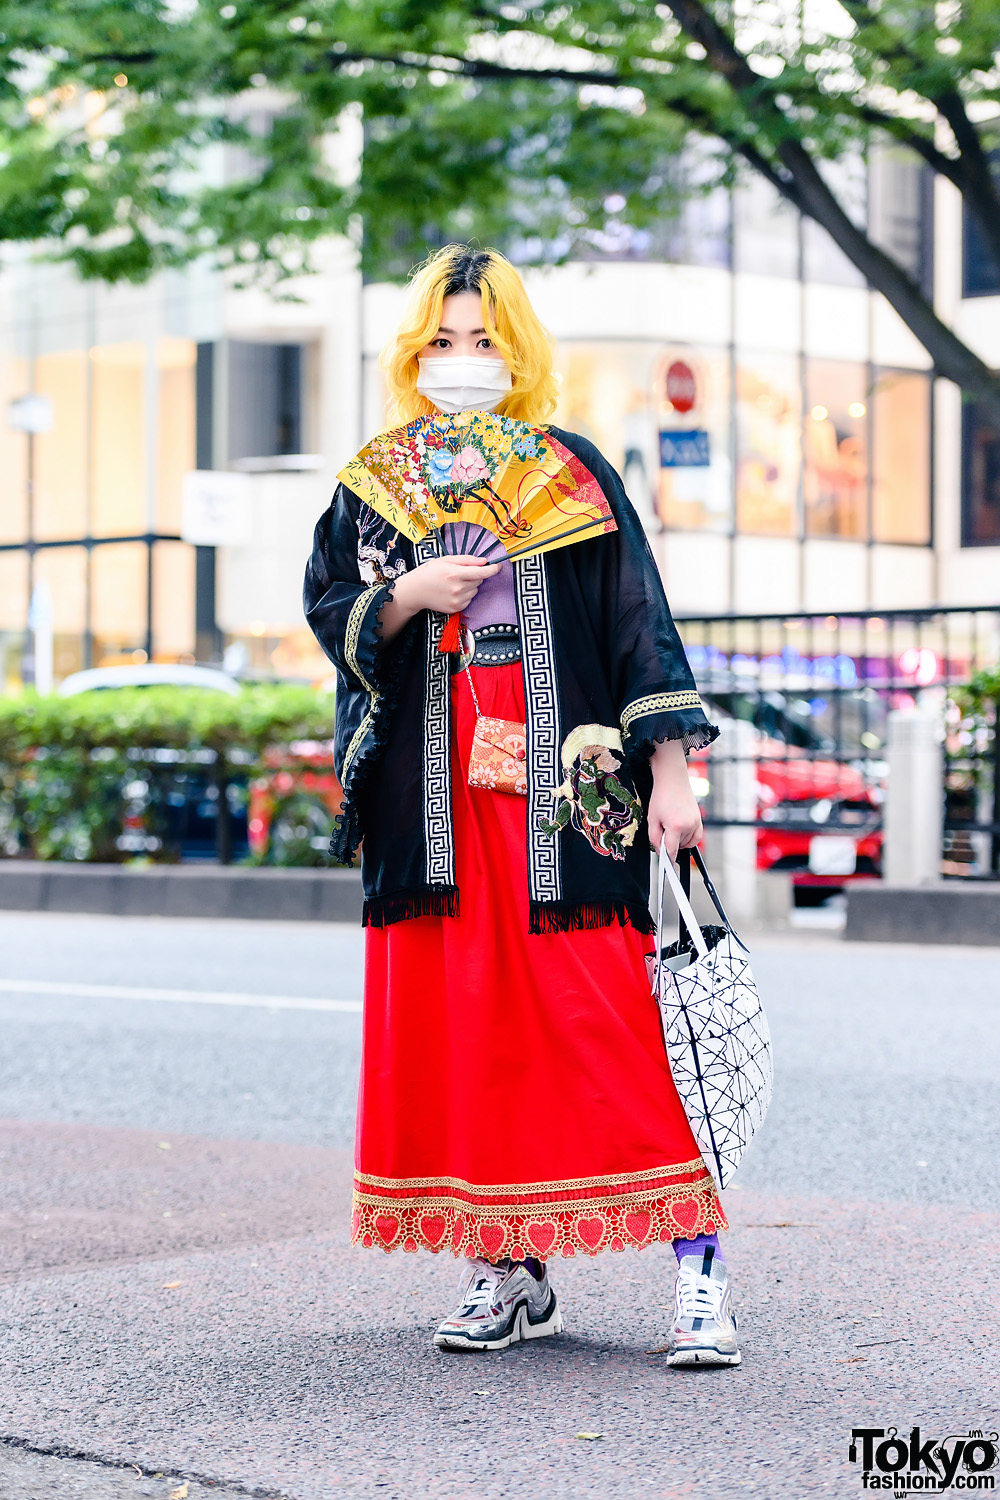 Sushi Shop Staffer's Eclectic Street Style w/ Yellow Hair, Painted